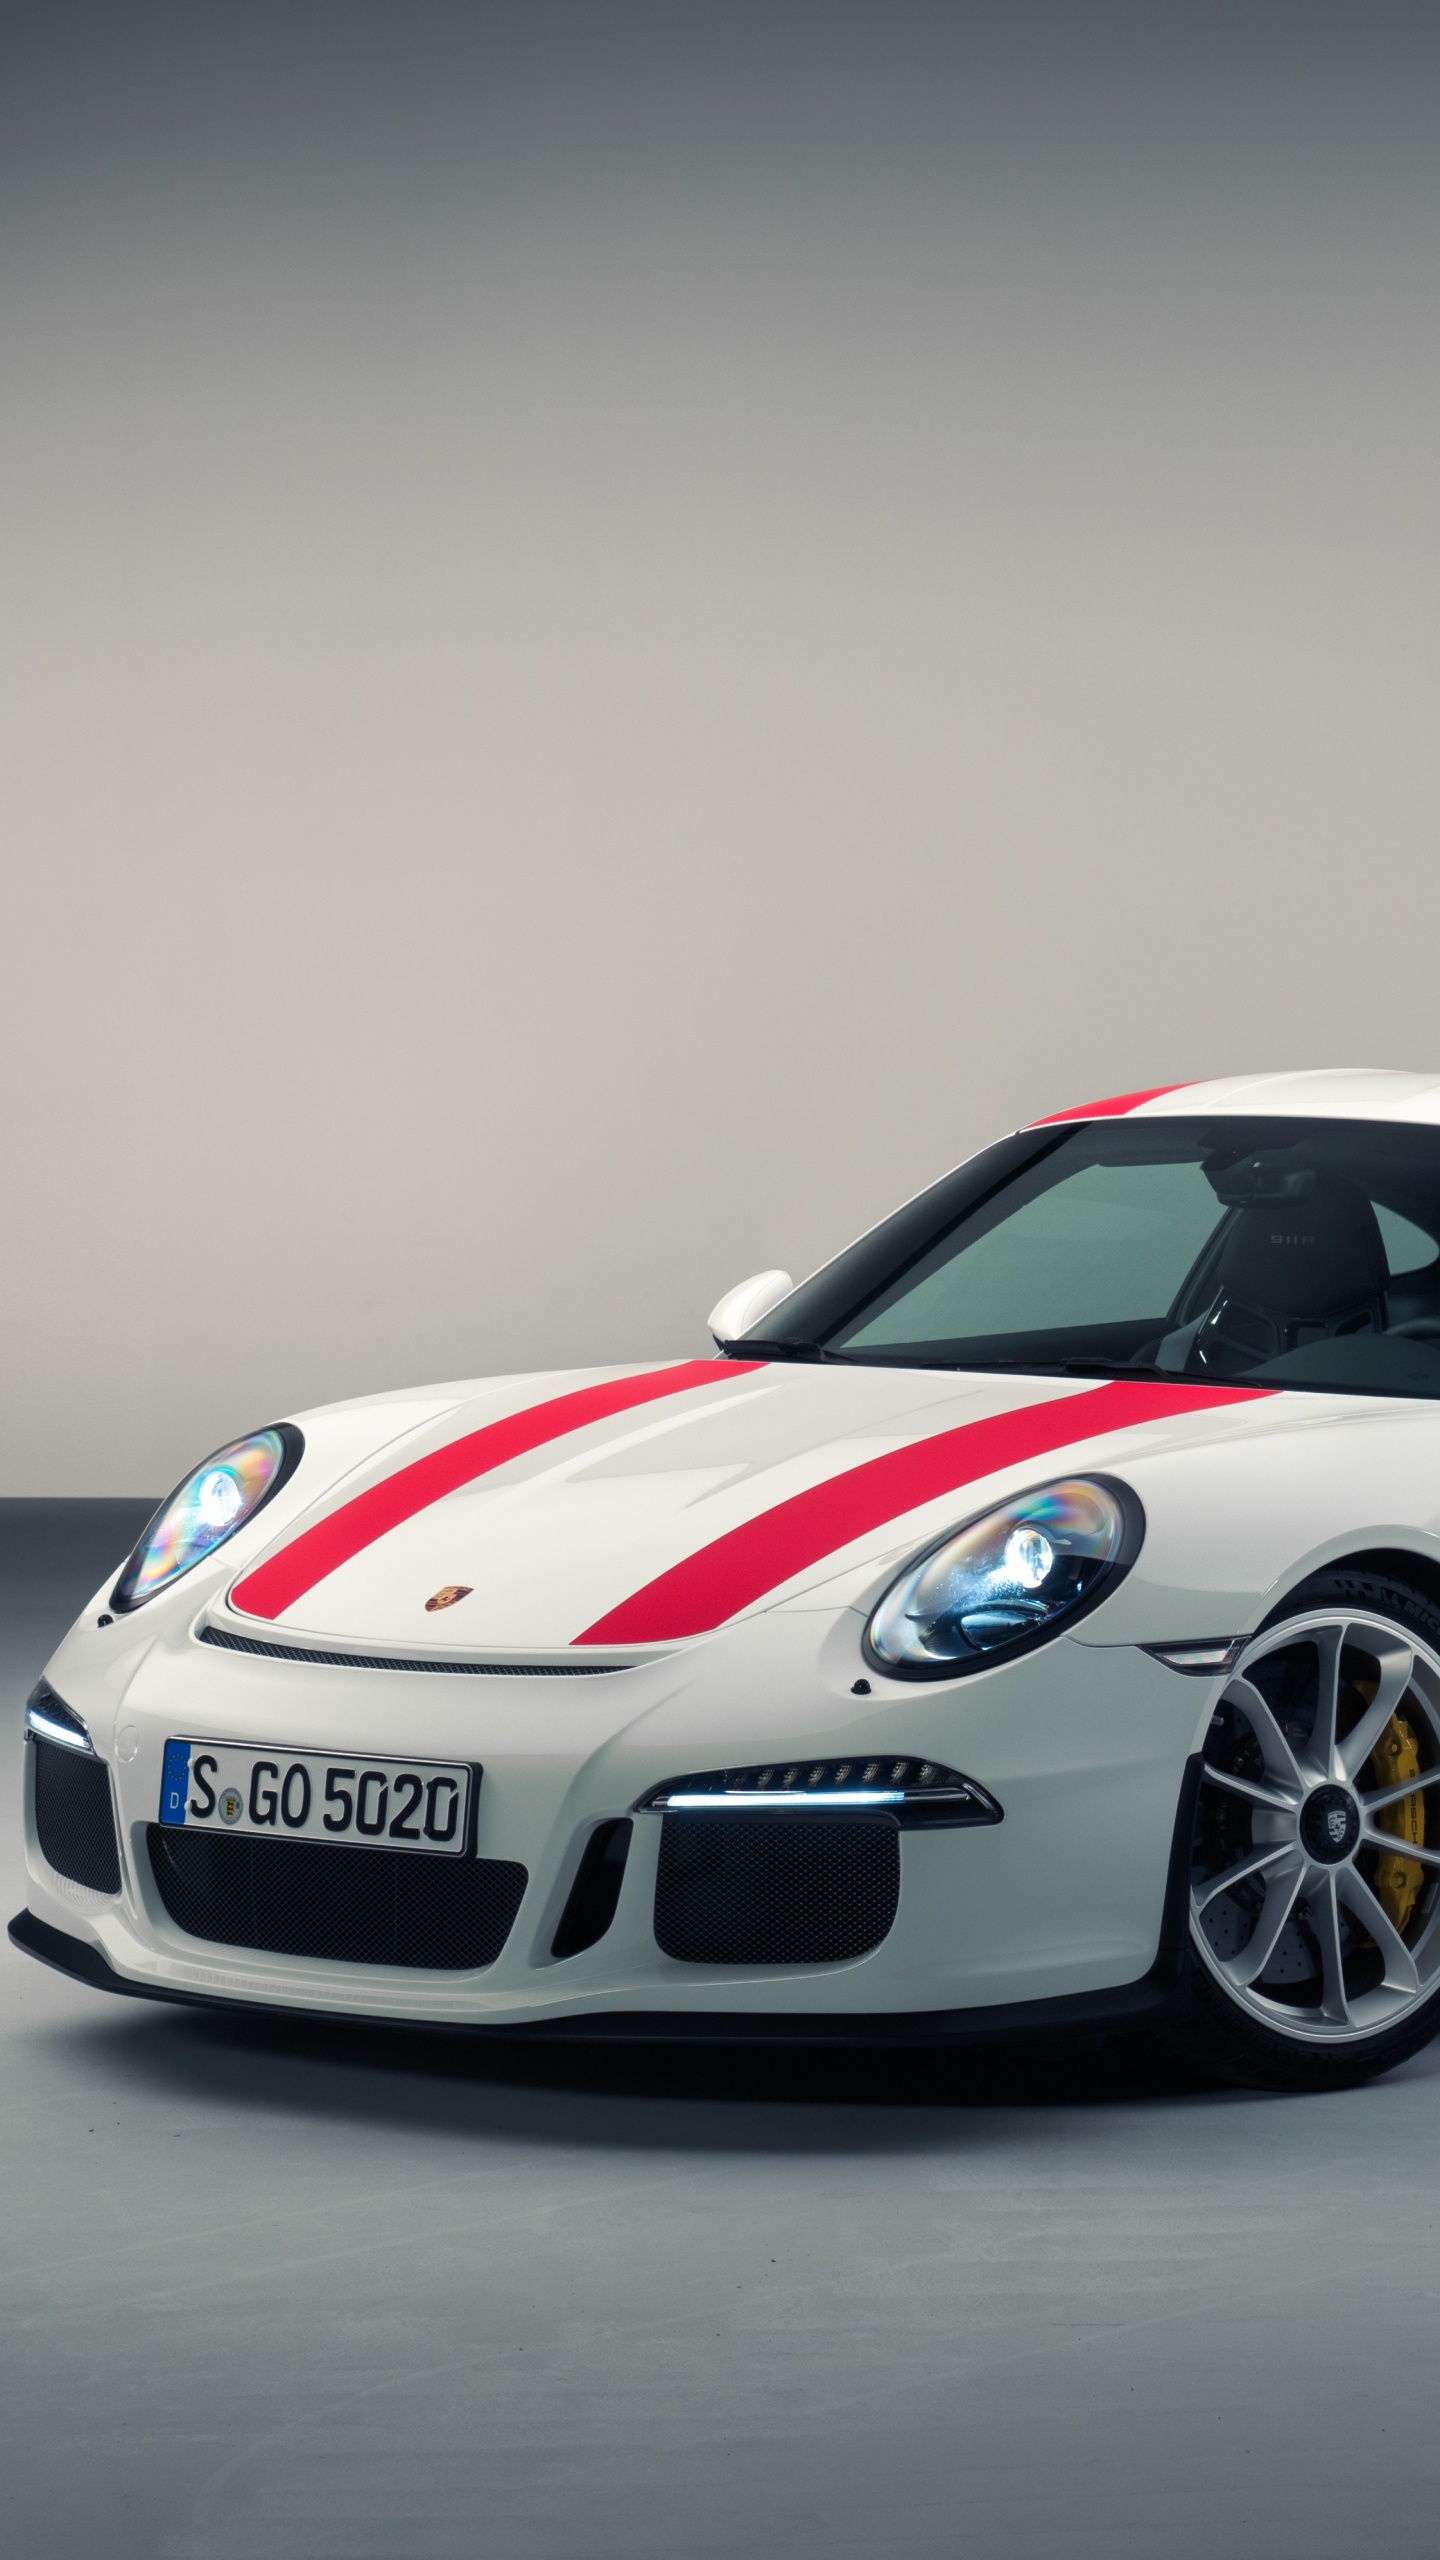 White and Red Porsche 911. Wallpaper in 1440x2560 Resolution